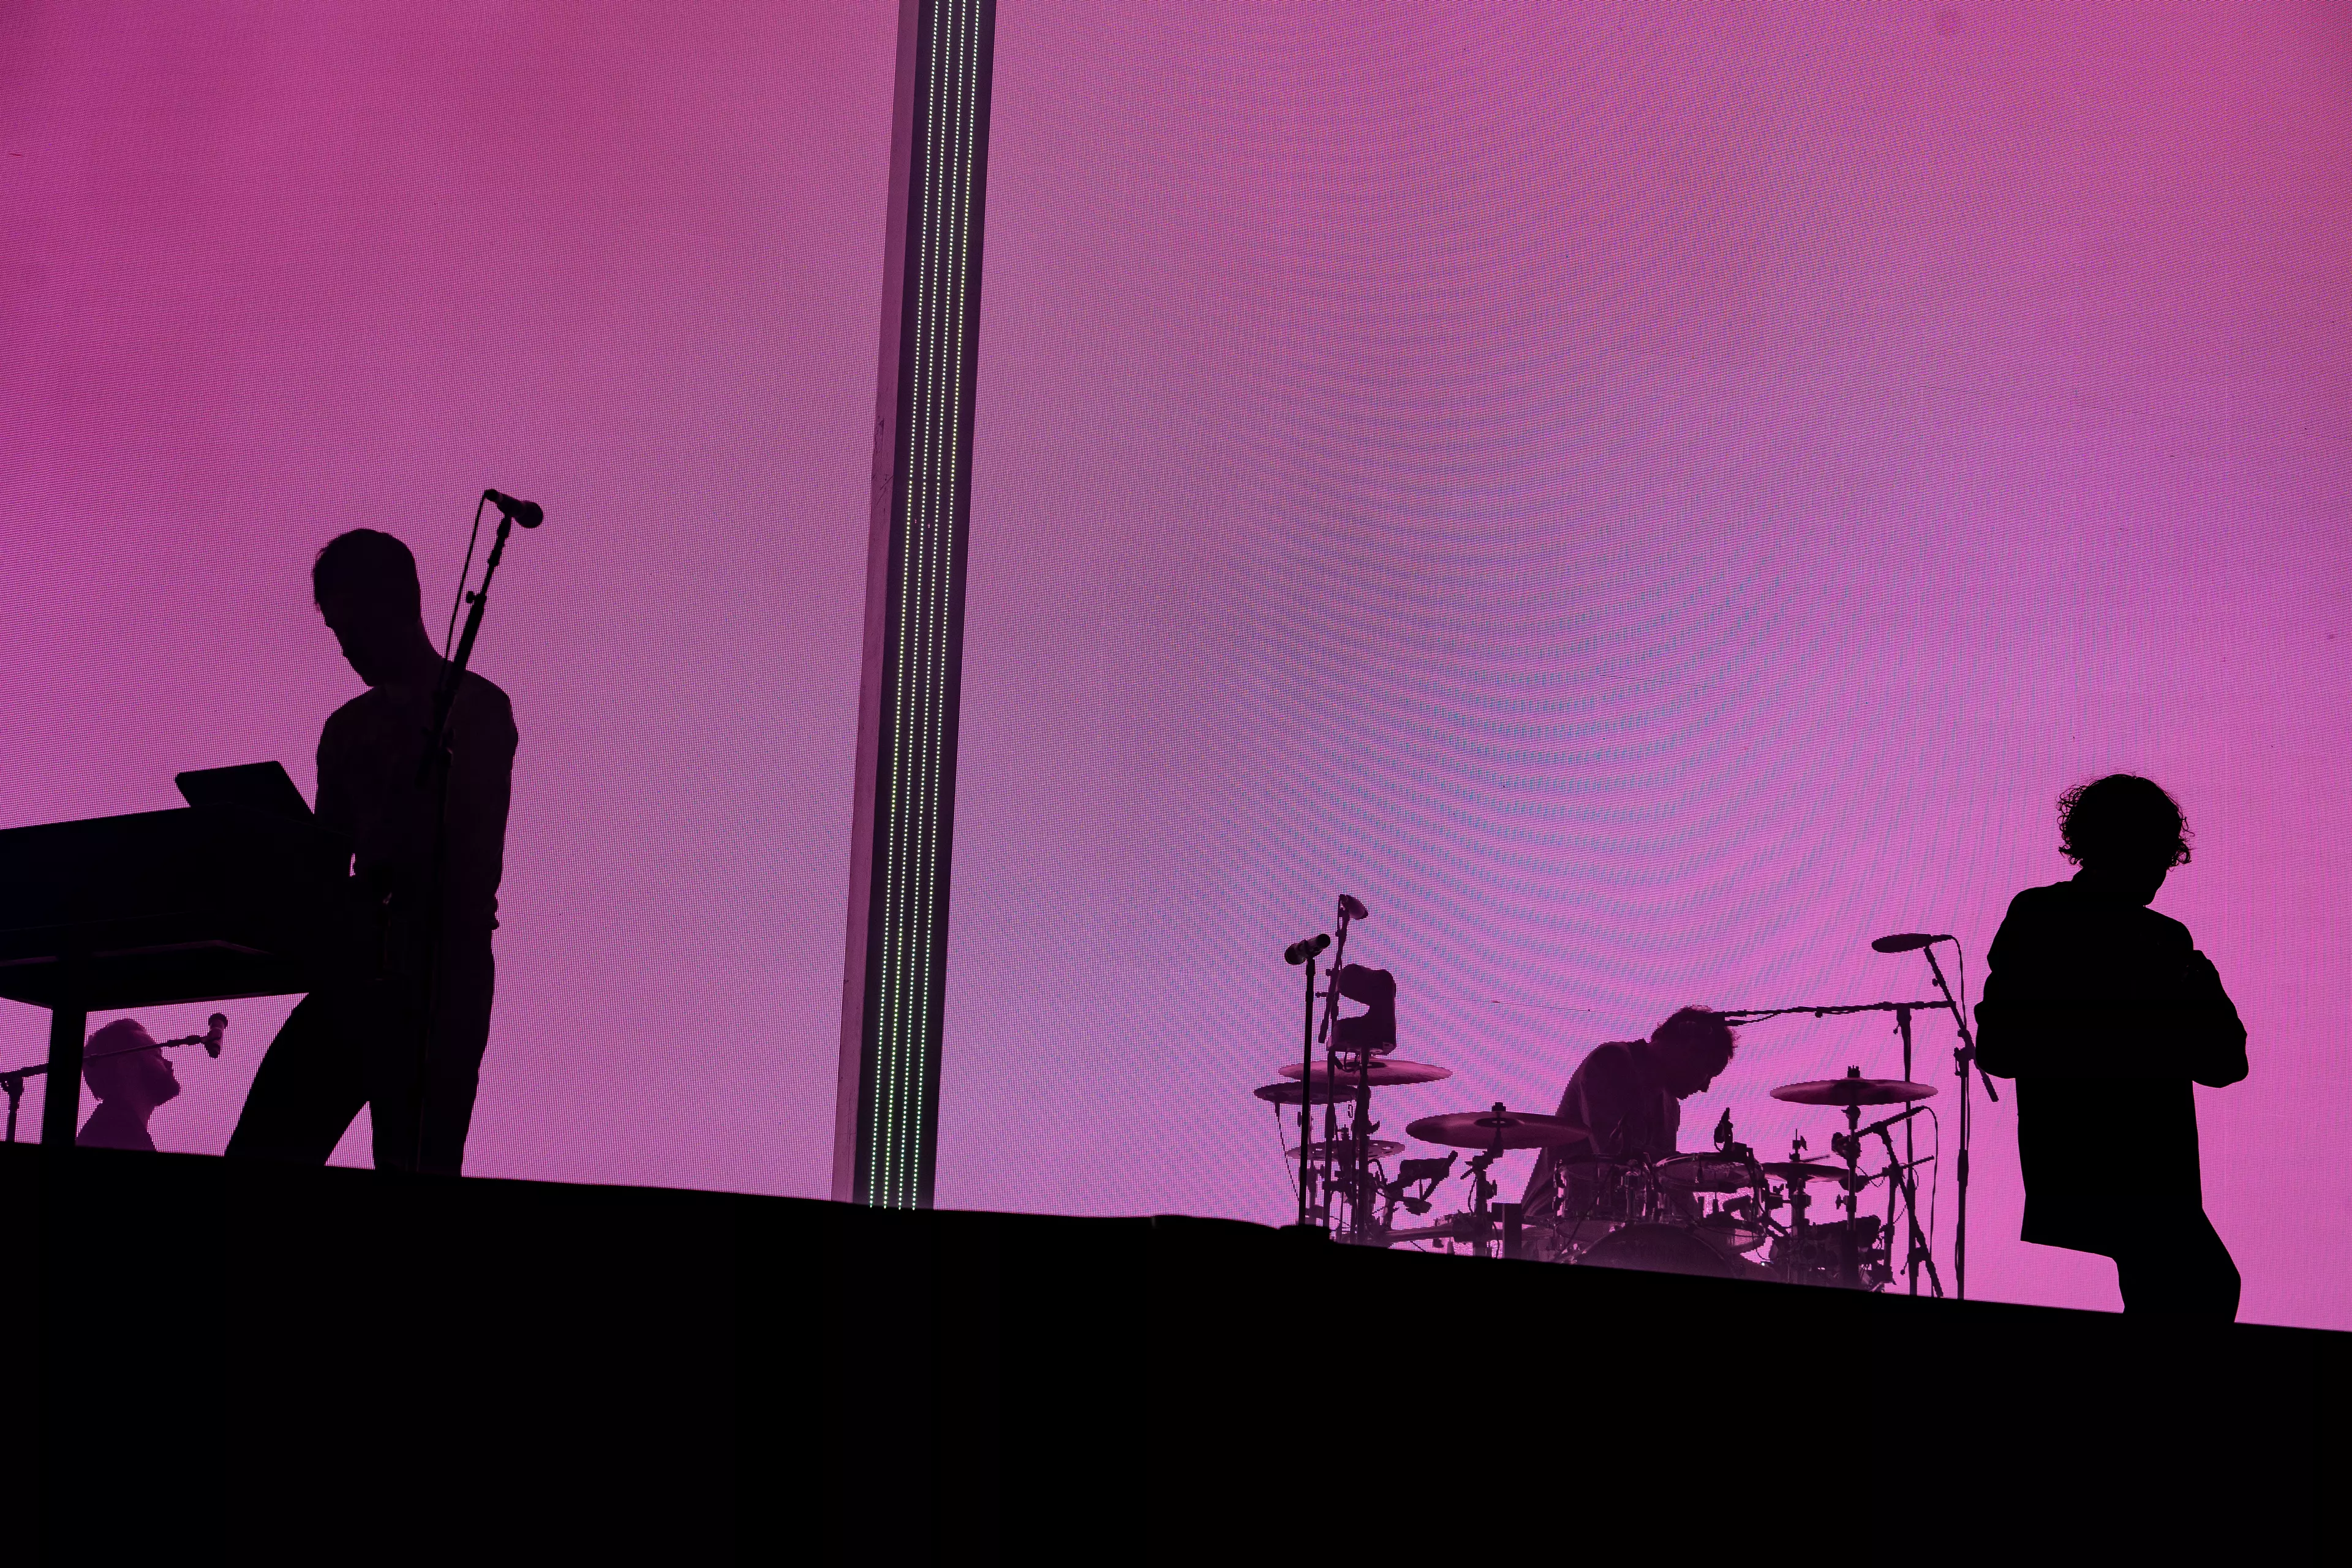 The 1975 UK tour will visit London, Manchester and Liverpool.